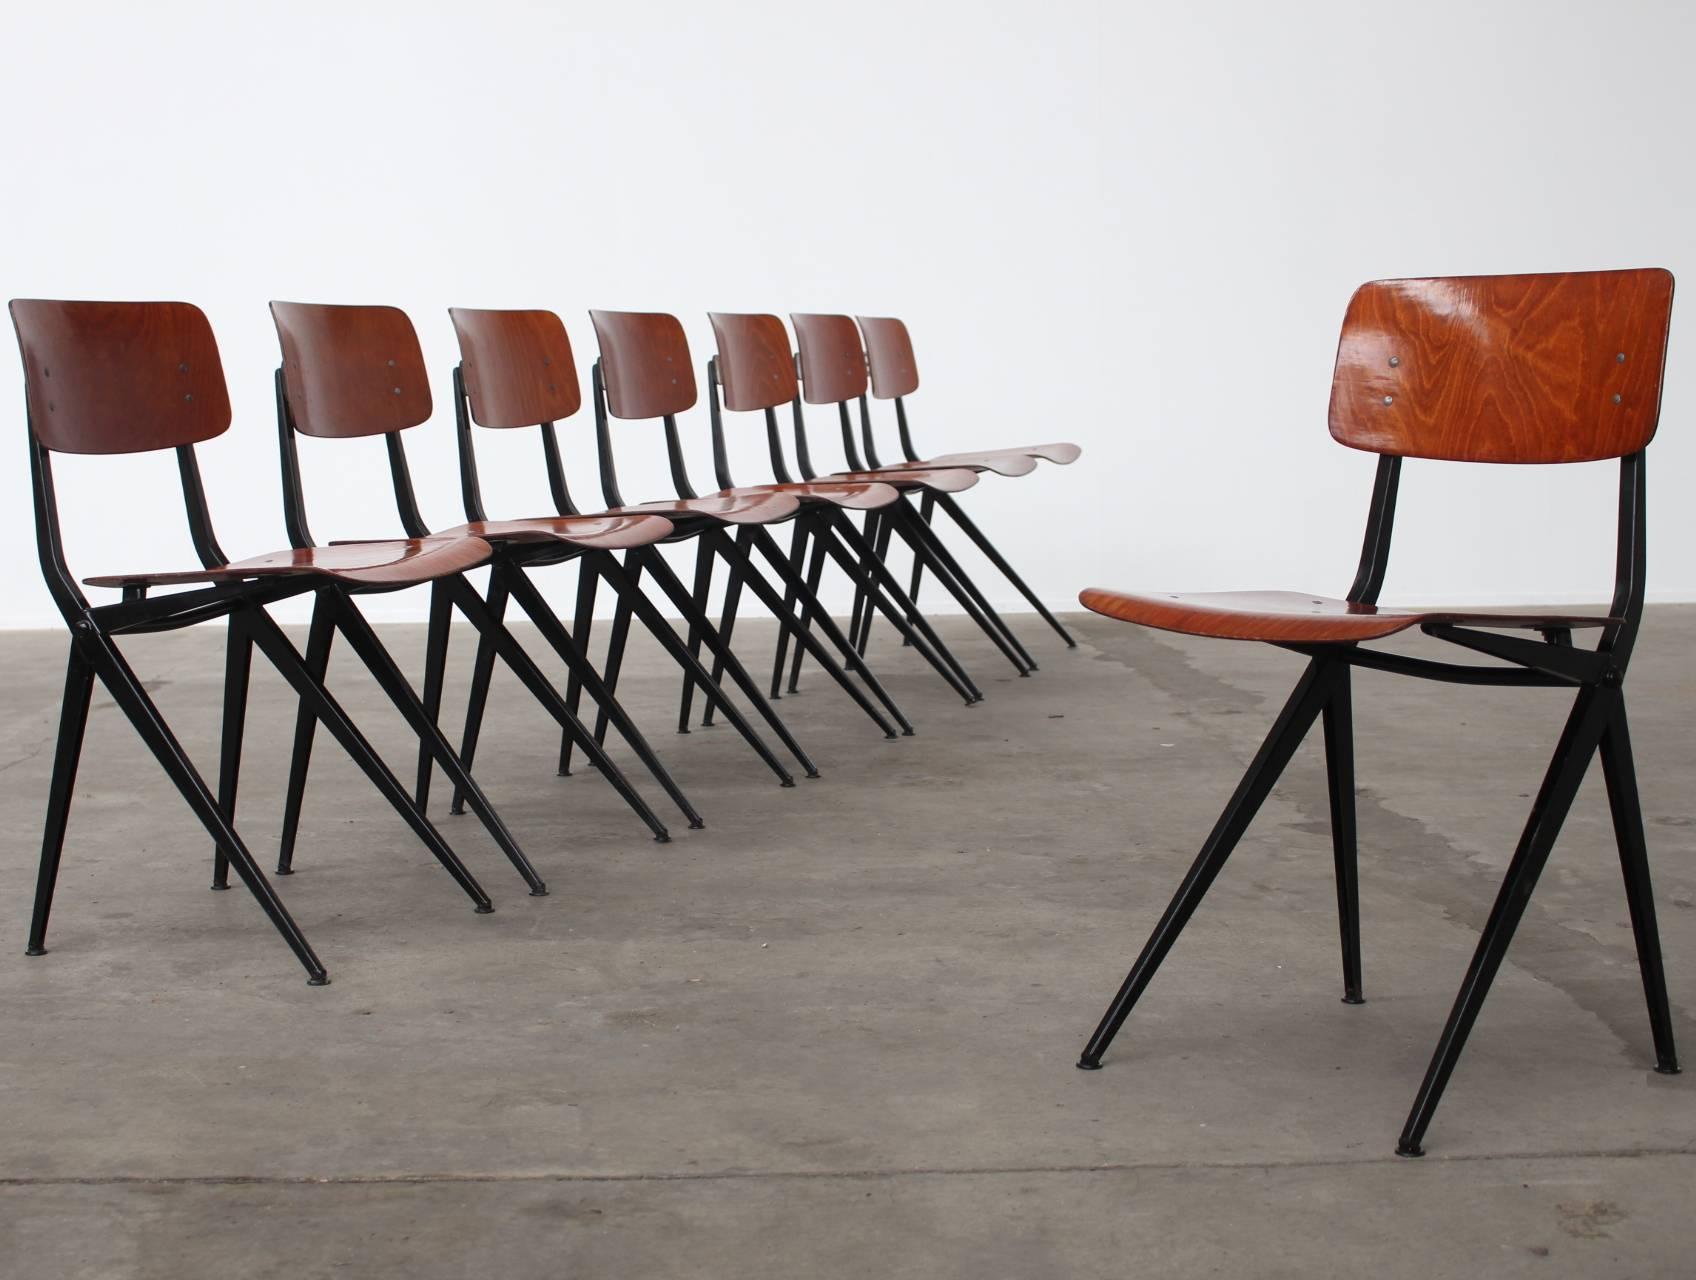 Set of eight stunning Industrial dining chairs by Dutch Industrial Design brand Marko. The steel frame has the elegant compass shape with a strong connection to the Industrial style of designs by Jean Prouvé and Gerrit Rietveld. This is the rarest